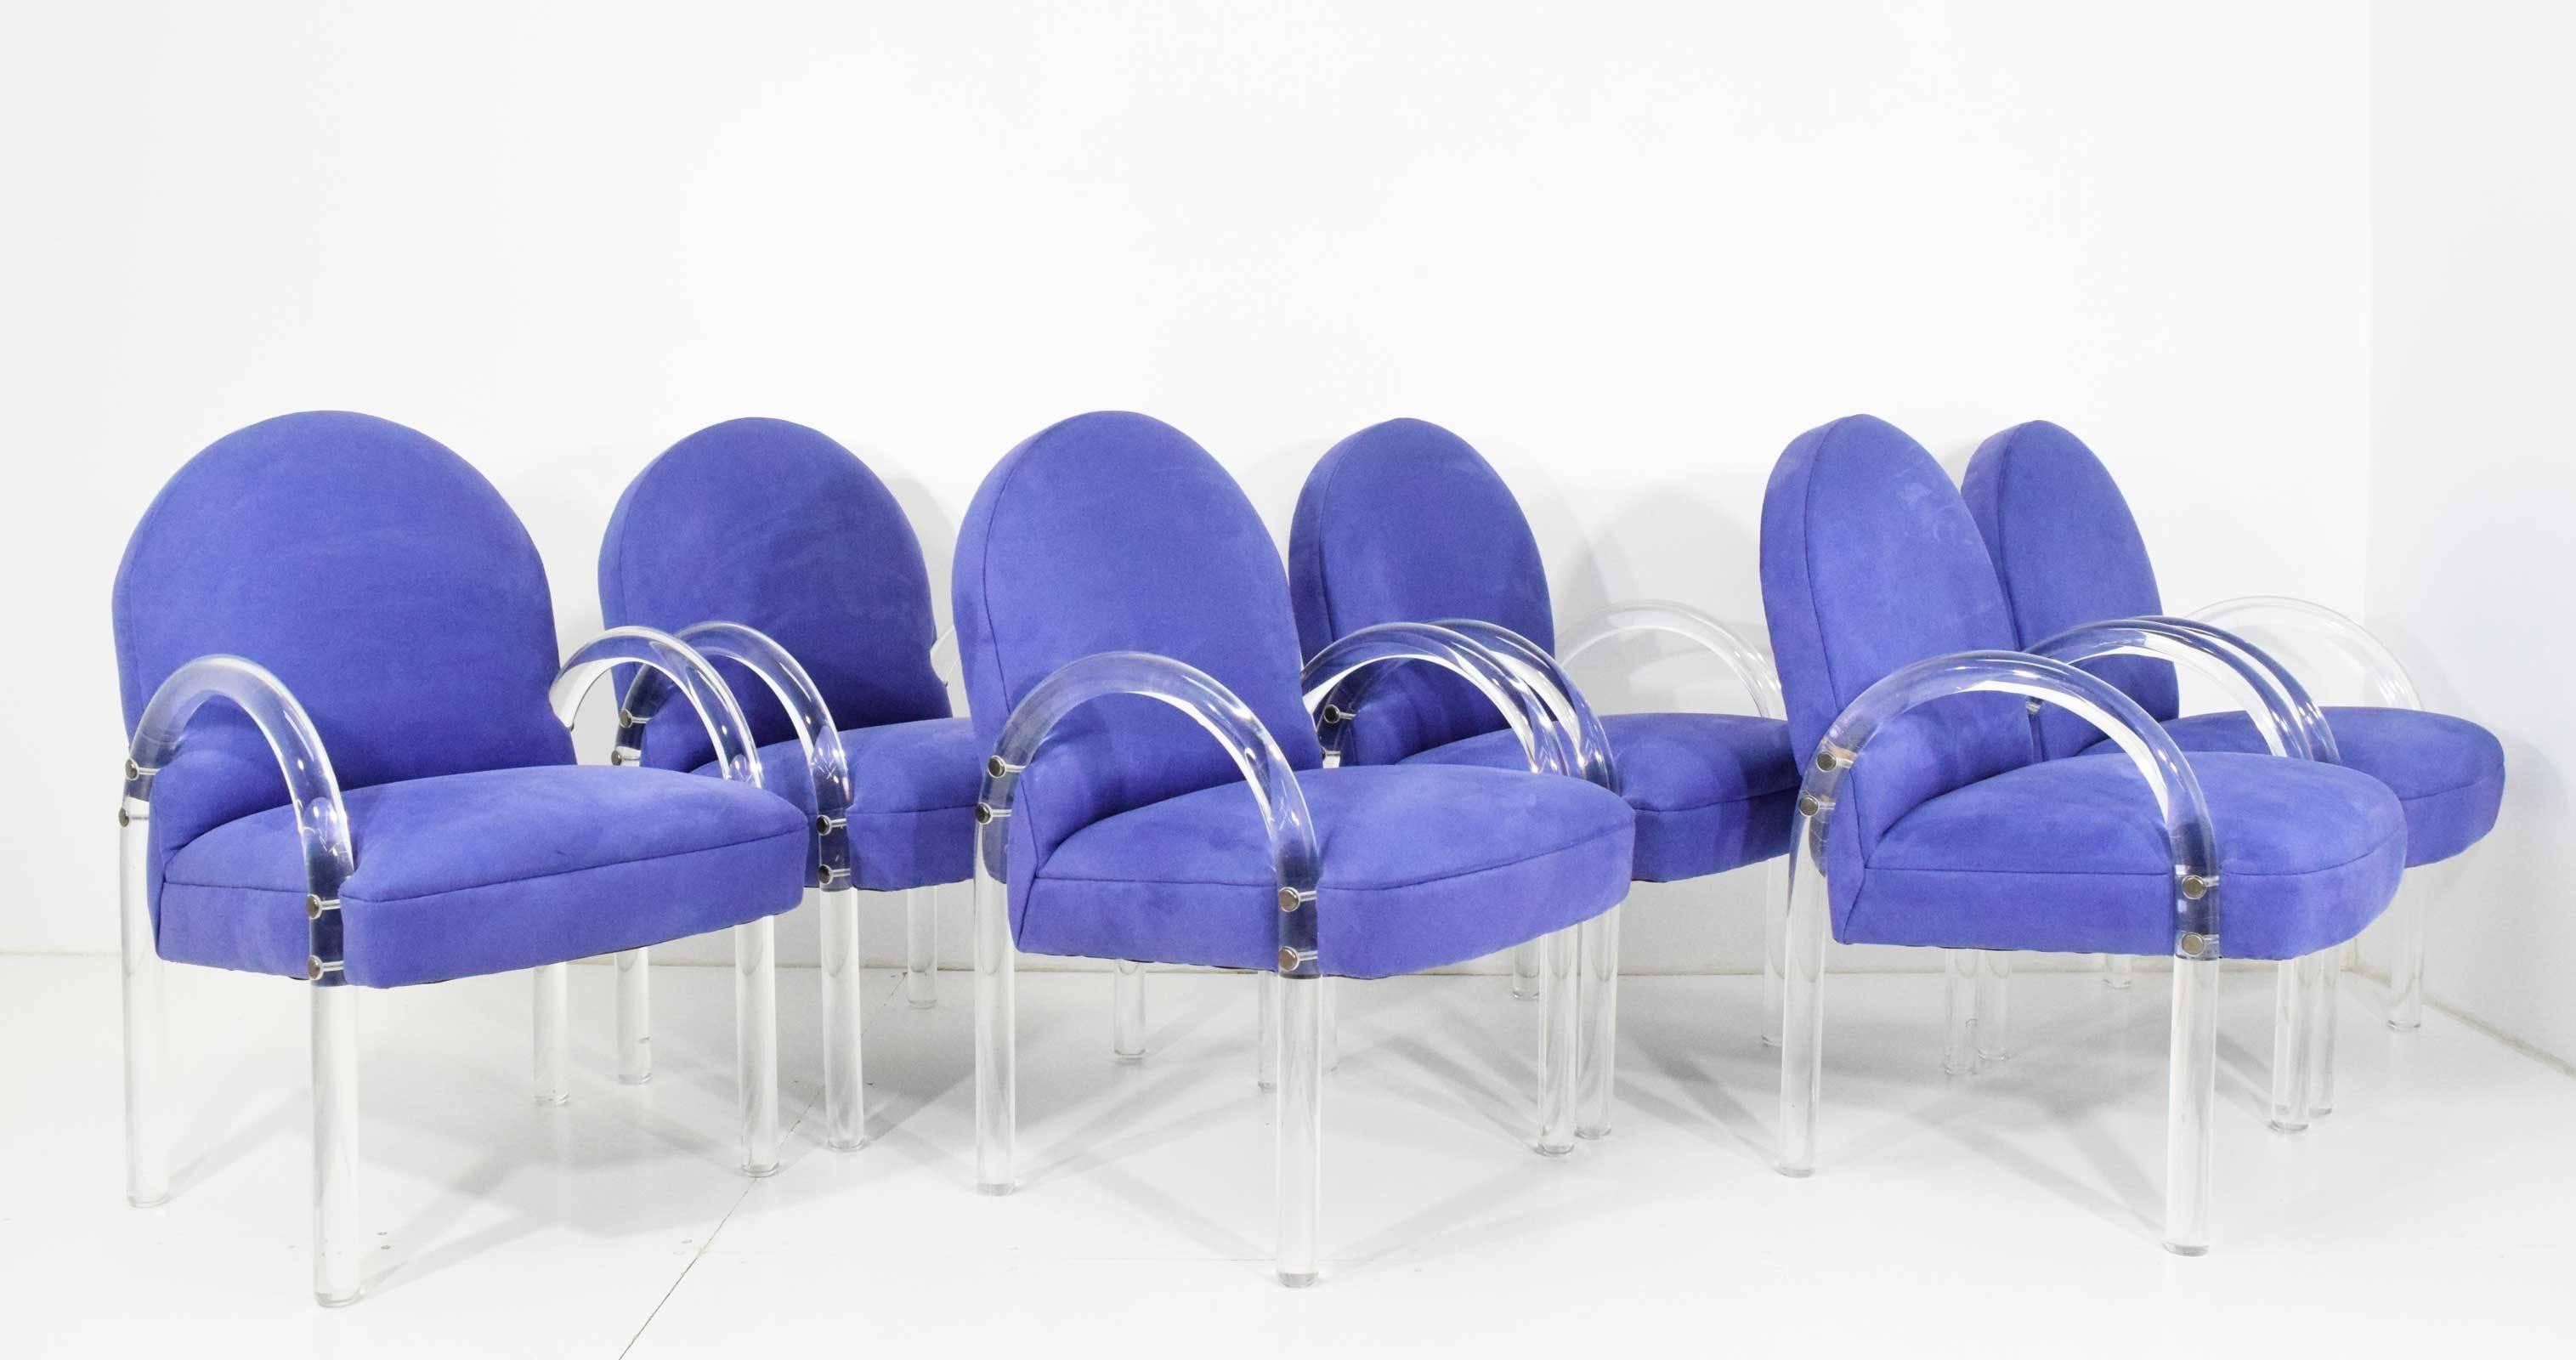 Chairs have curved Lucite arms and are upholstered in a rich lavender microfiber. Brass fittings. Upholstery is wonderful or you can change if you desire. Foam is great as well.